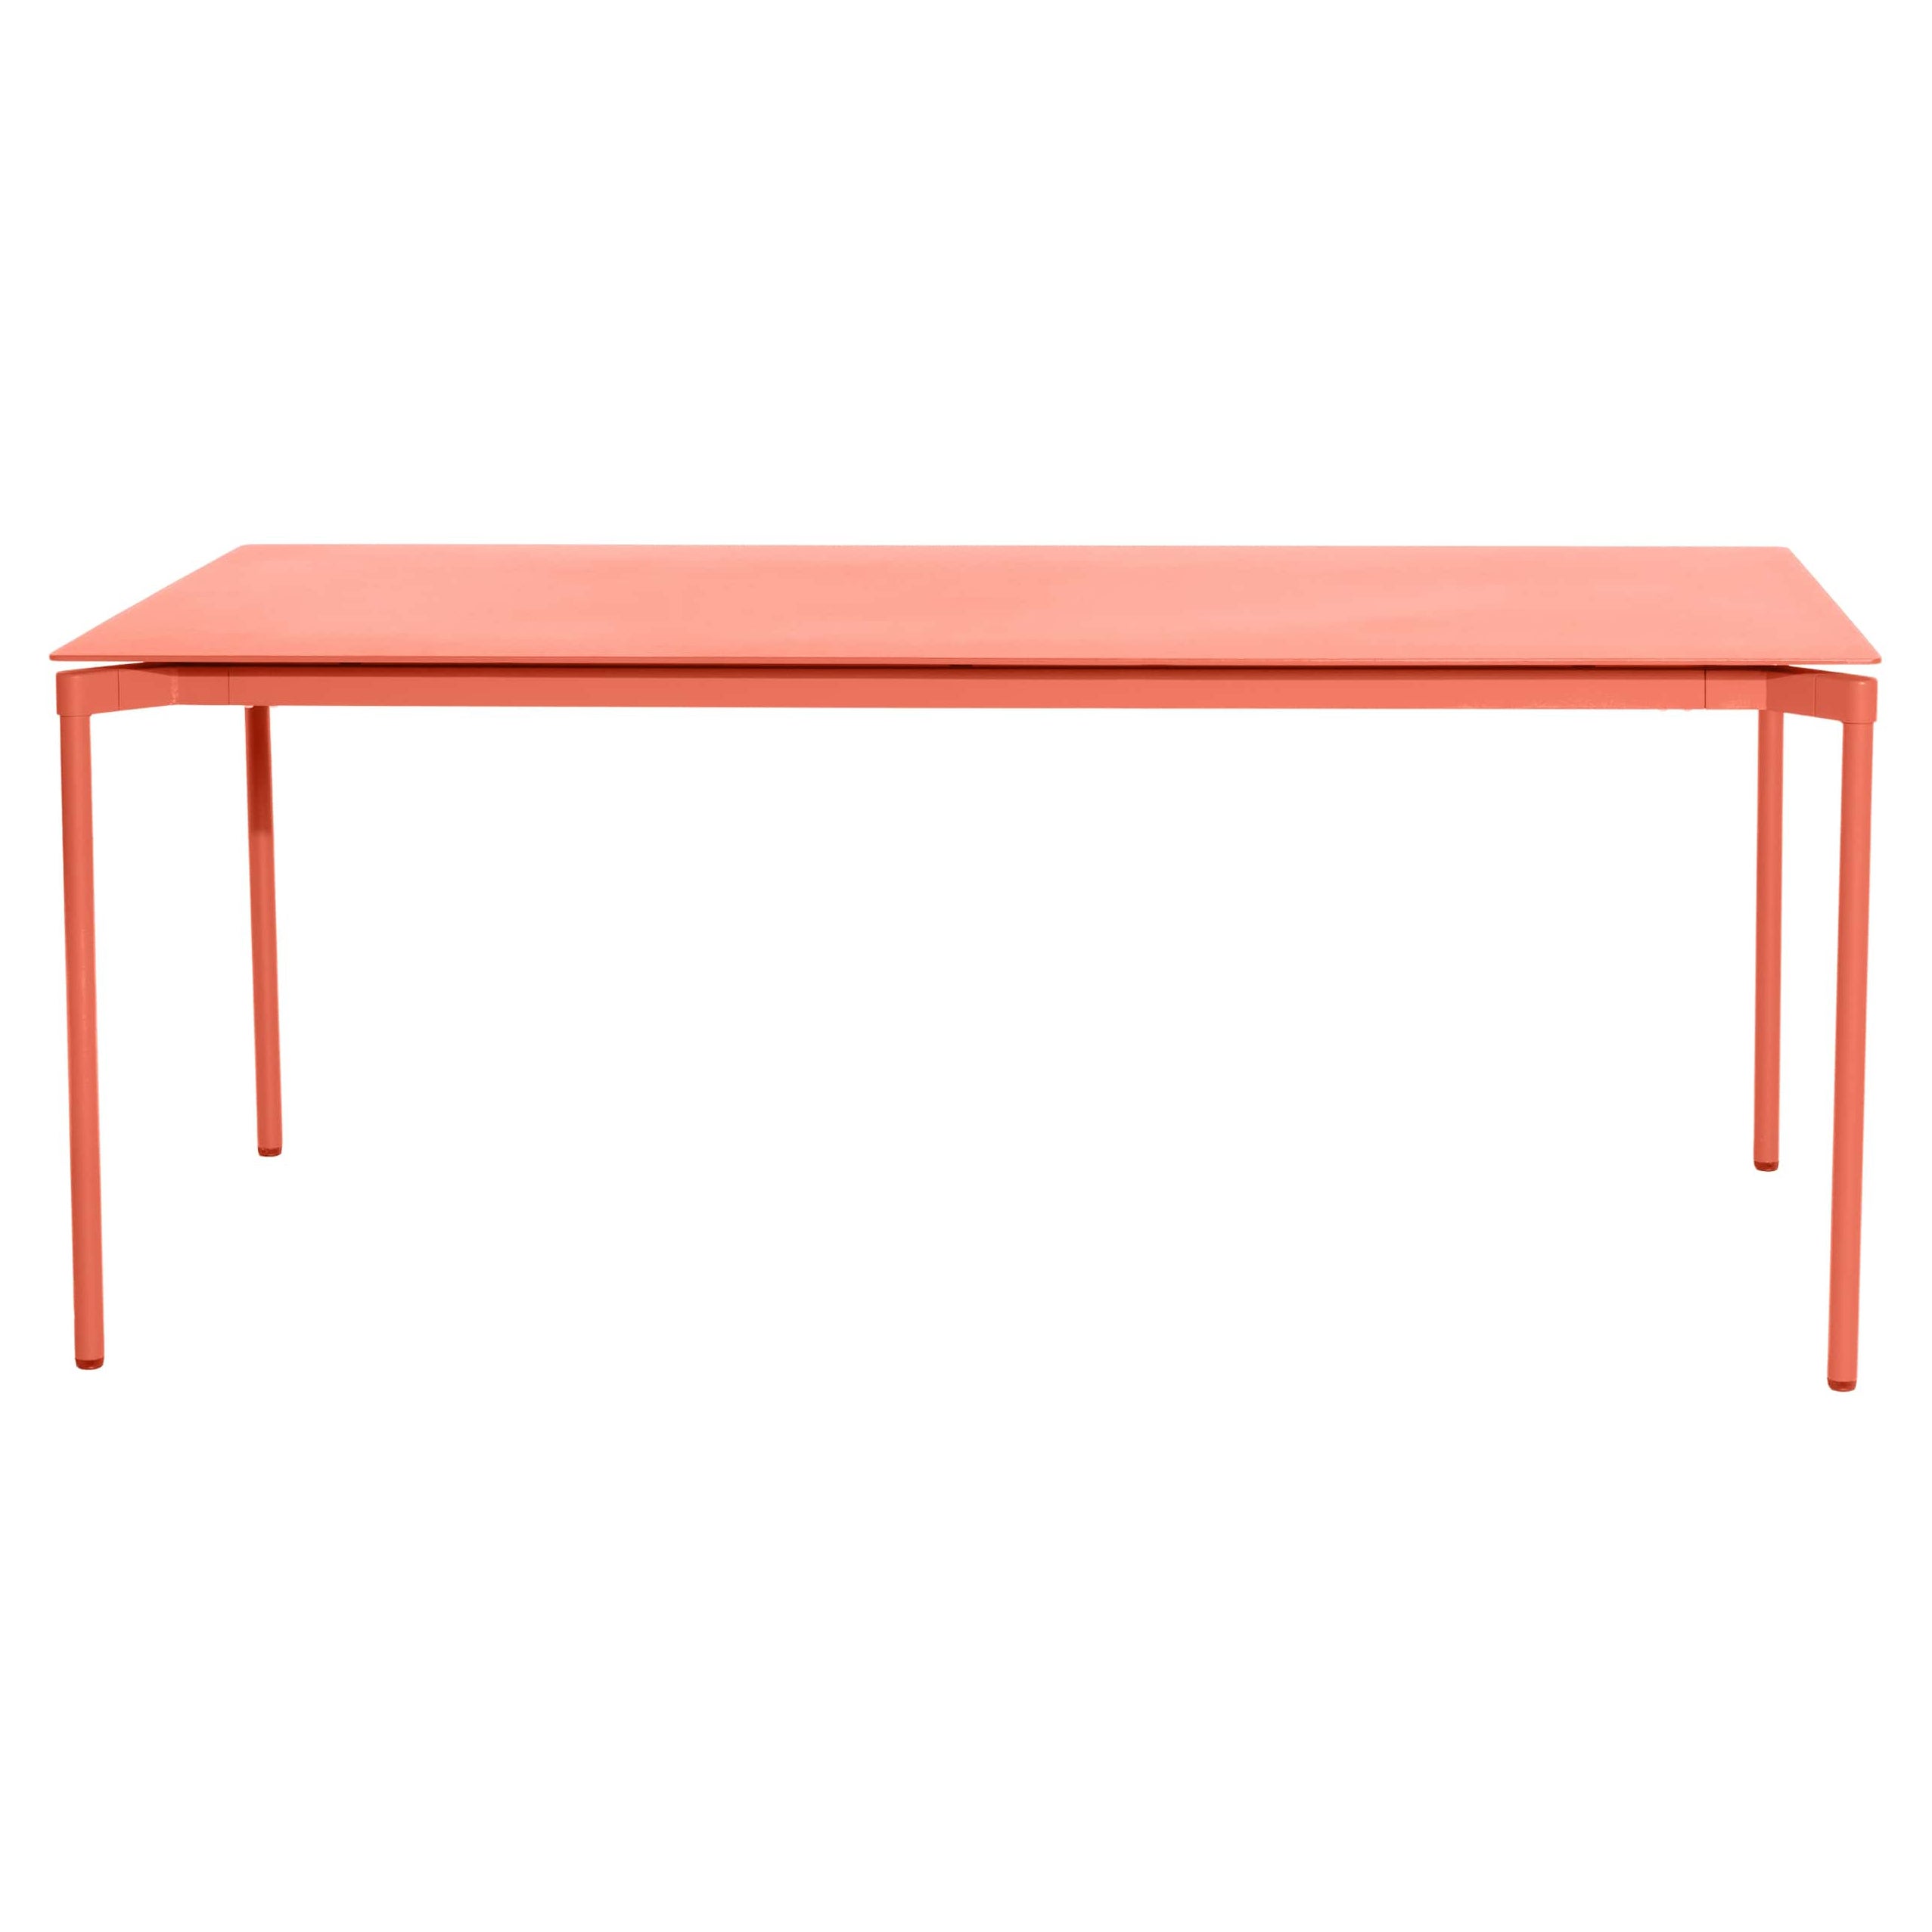 Petite Friture Fromme Rectangular Table in Coral Aluminium by Tom Chung